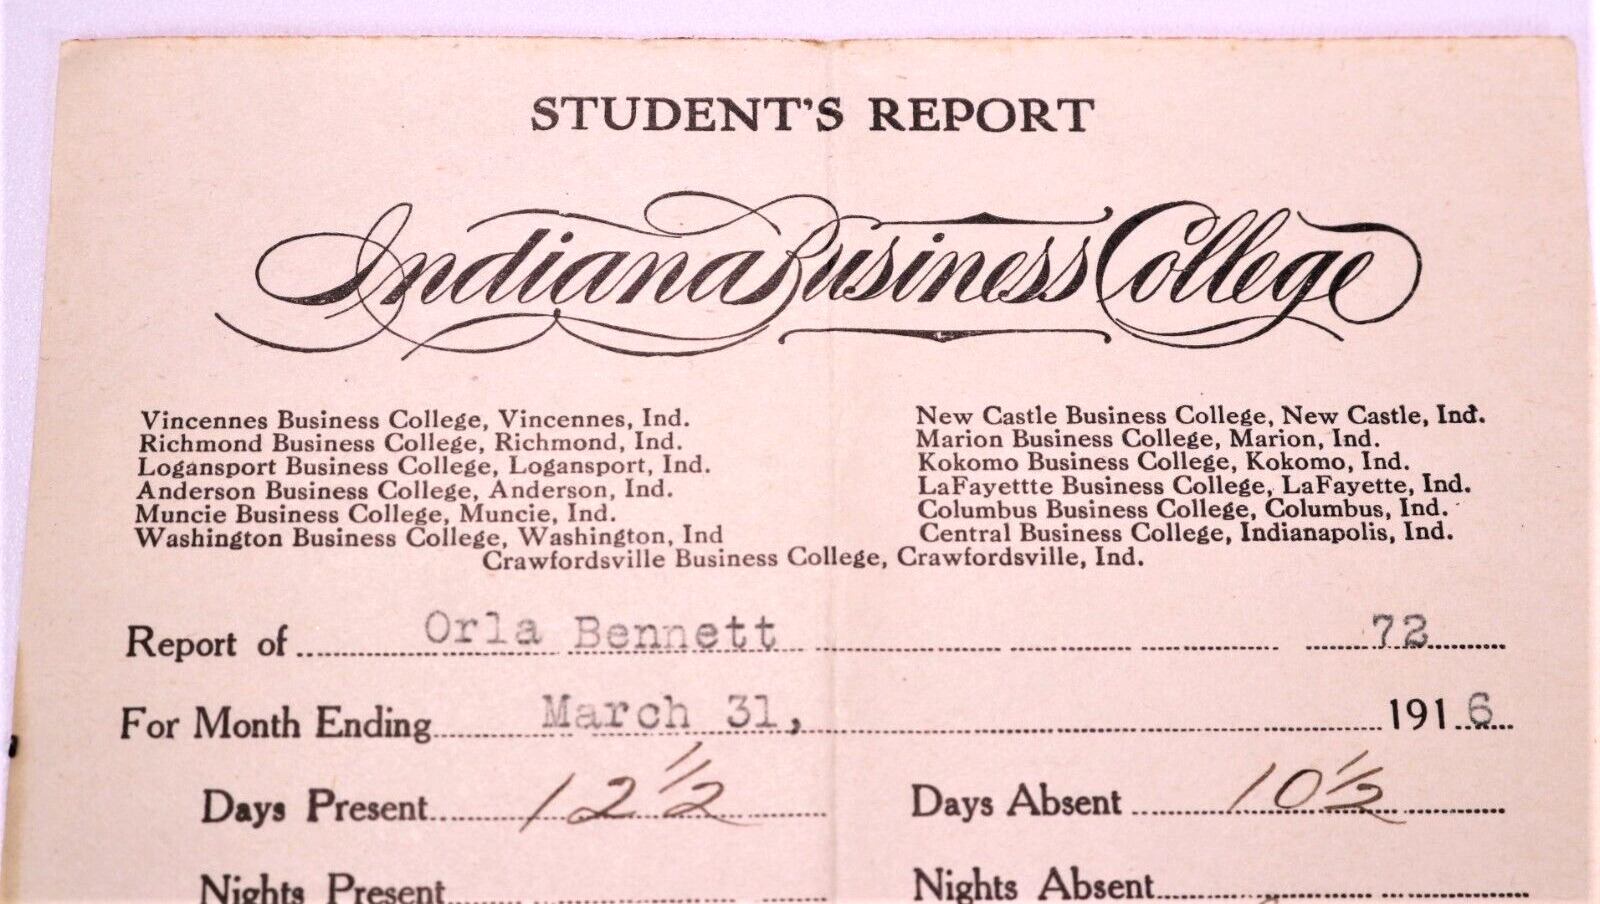 1916 Indiana Business College Student Report Card w/Vintage Letterhead Script